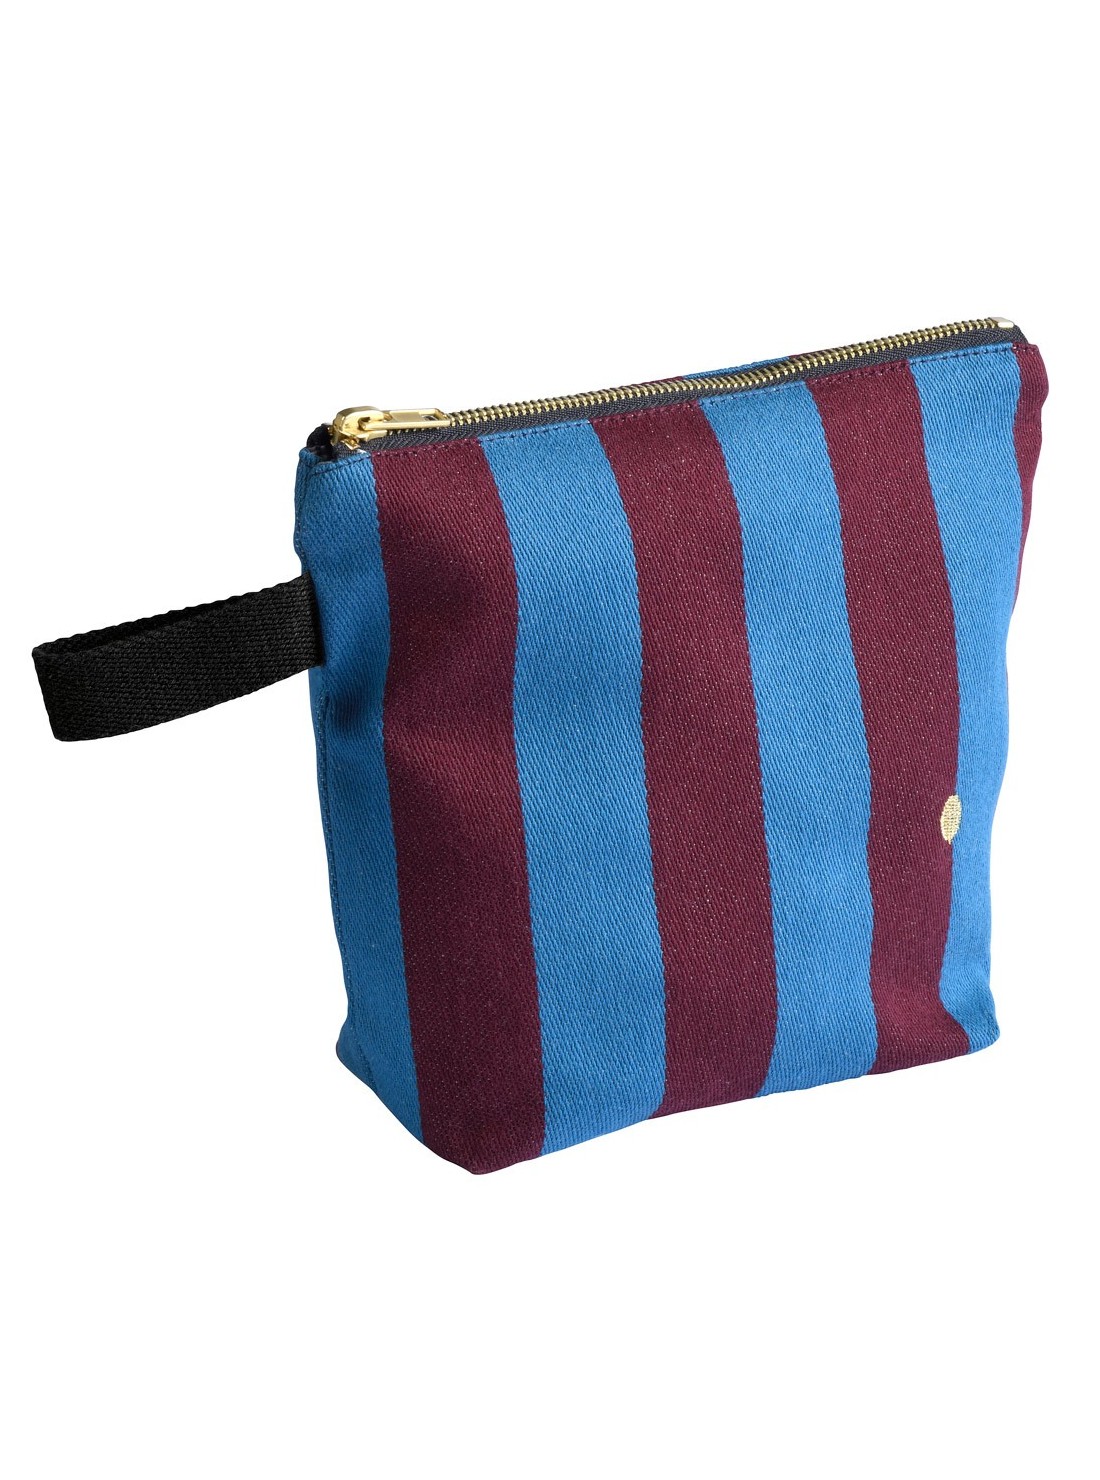 Toiletry bag cottonHarry berry PM